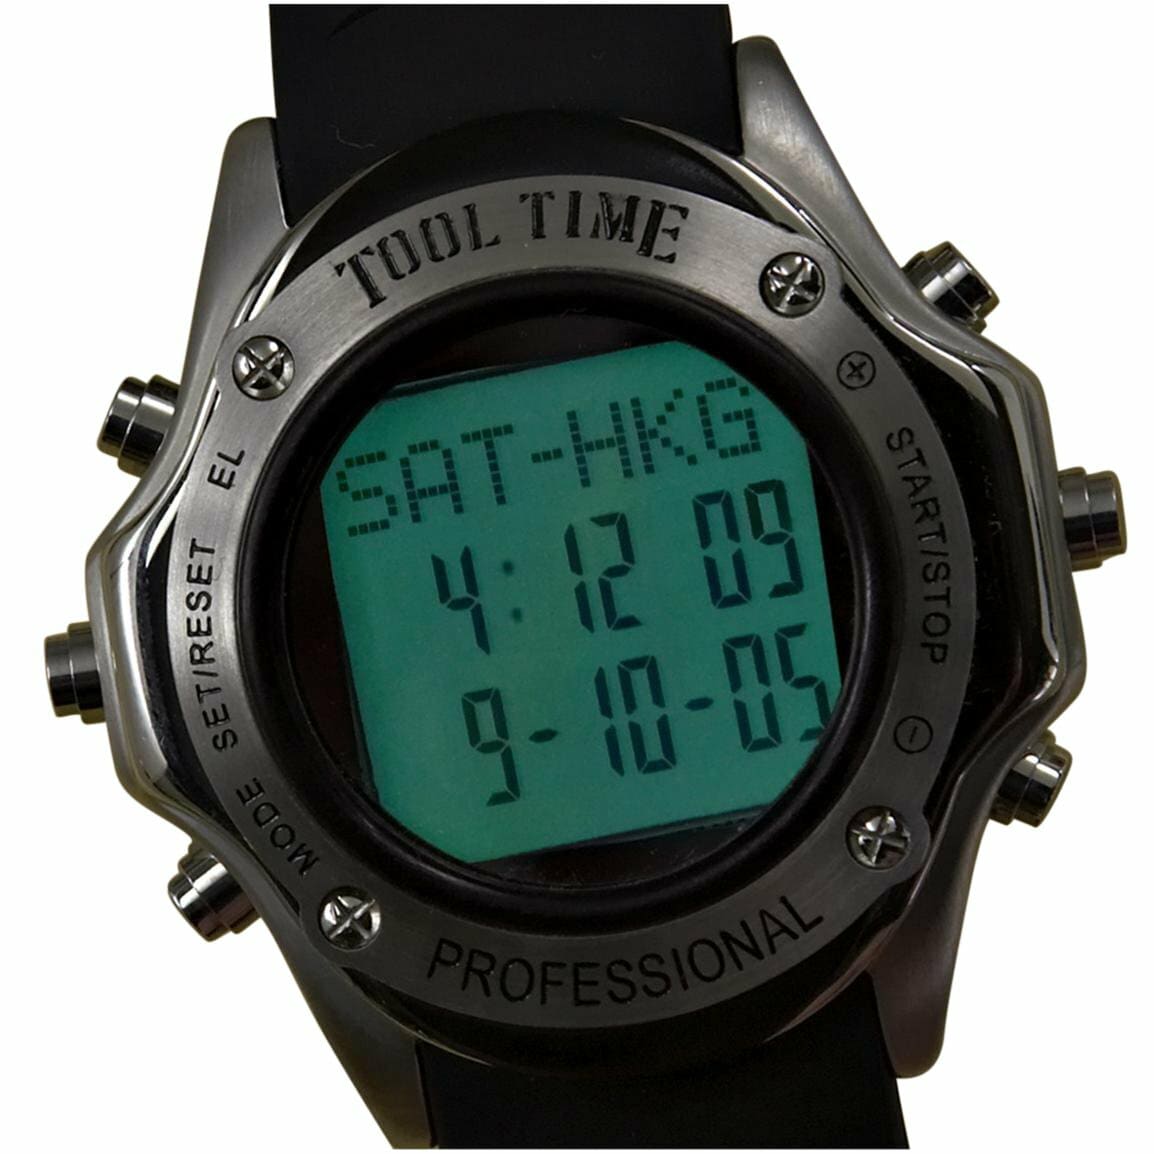 Field & Stream Tool Time Multi Function Shock Proof Shatter Resistant Data Chronograph Rugged Watch F400GKSKADDC